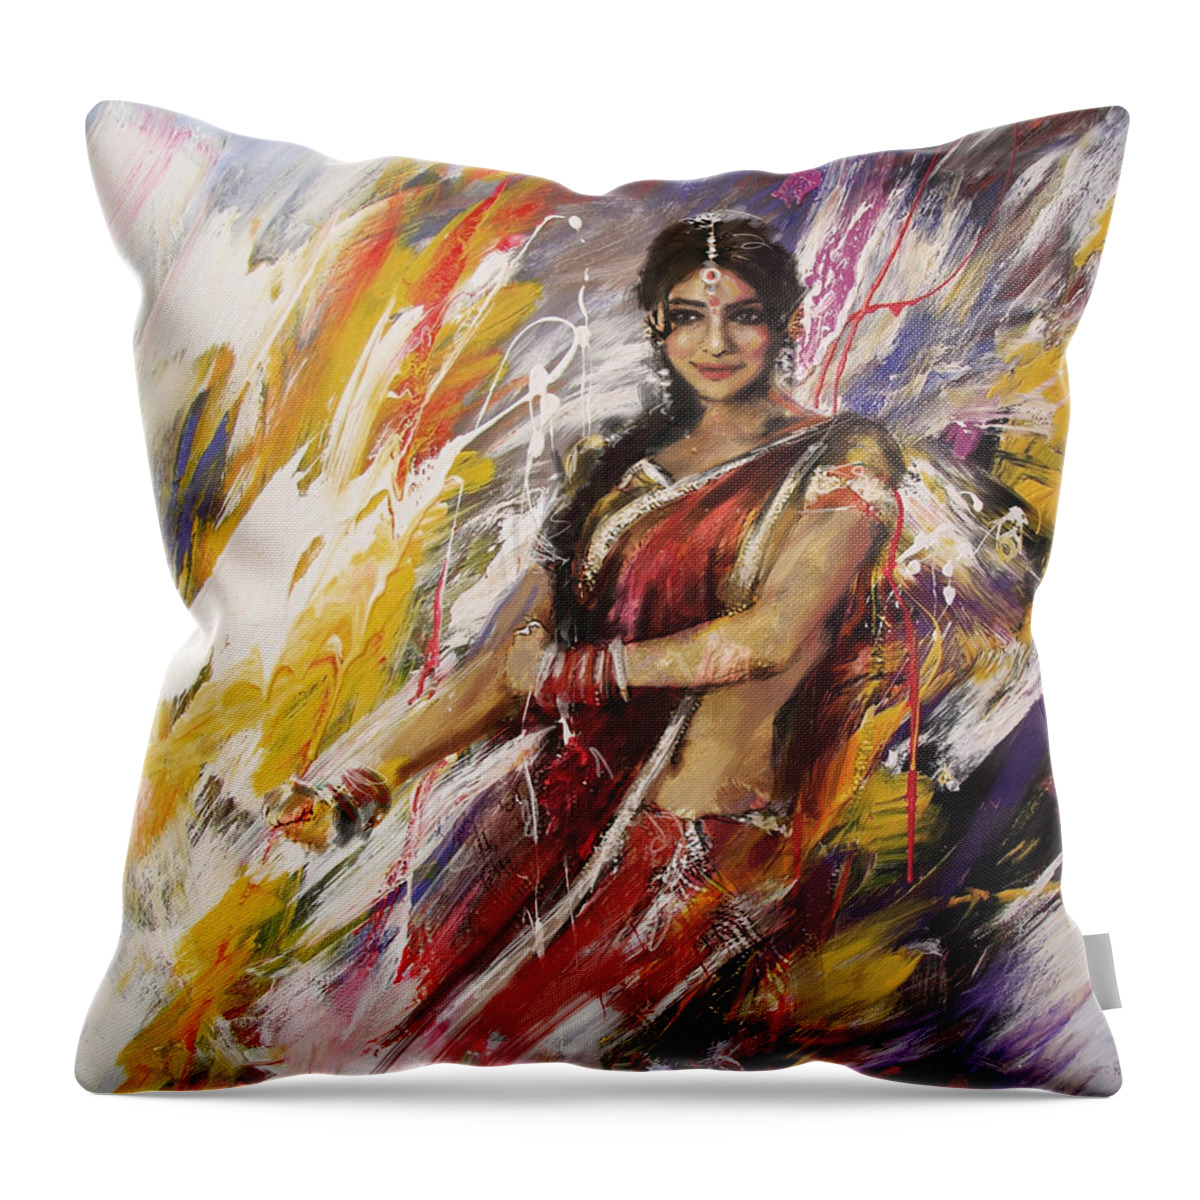 Zakir Throw Pillow featuring the painting Classical Dance Art 14 by Maryam Mughal